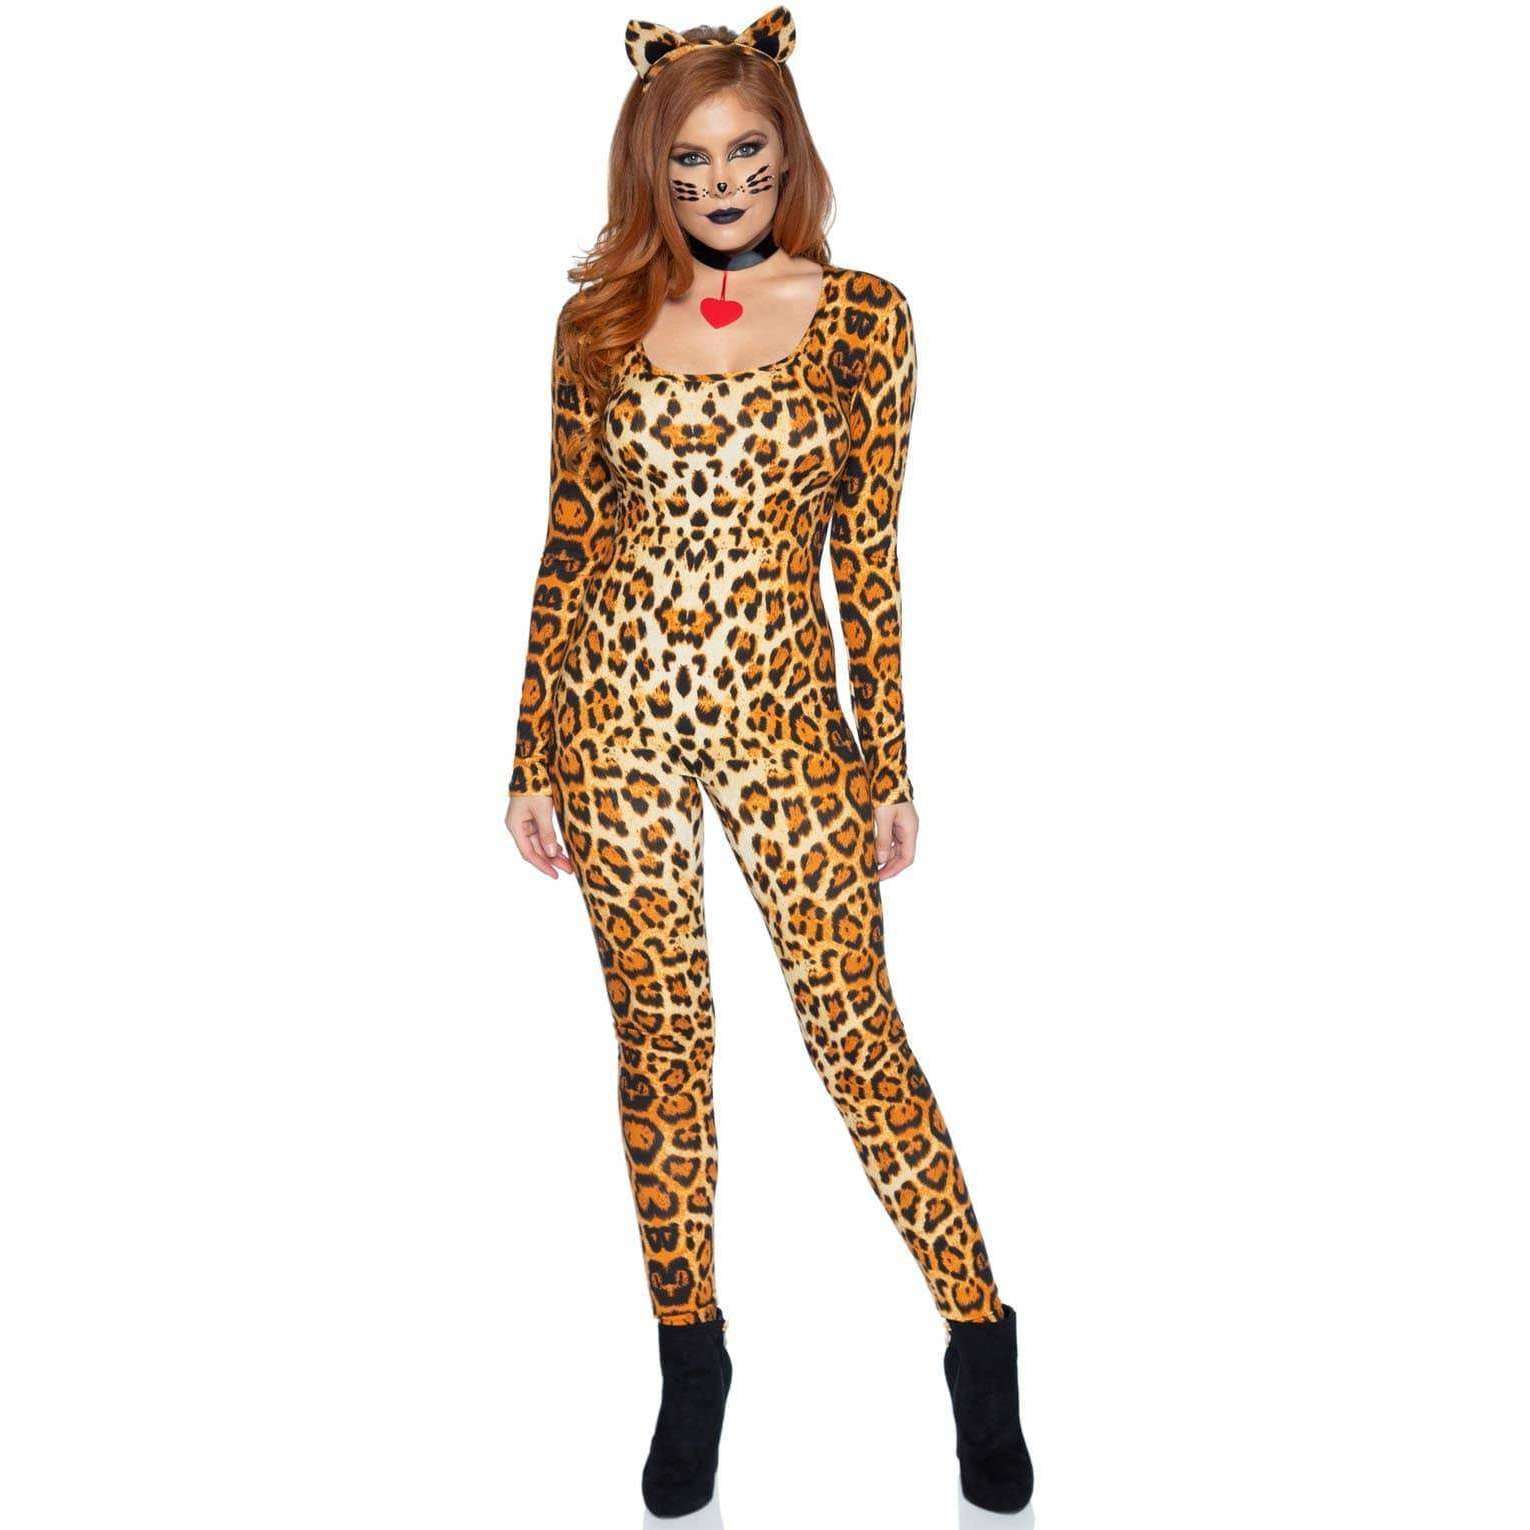 Sexy Cougar 3pc Bodysuit Adult Costume